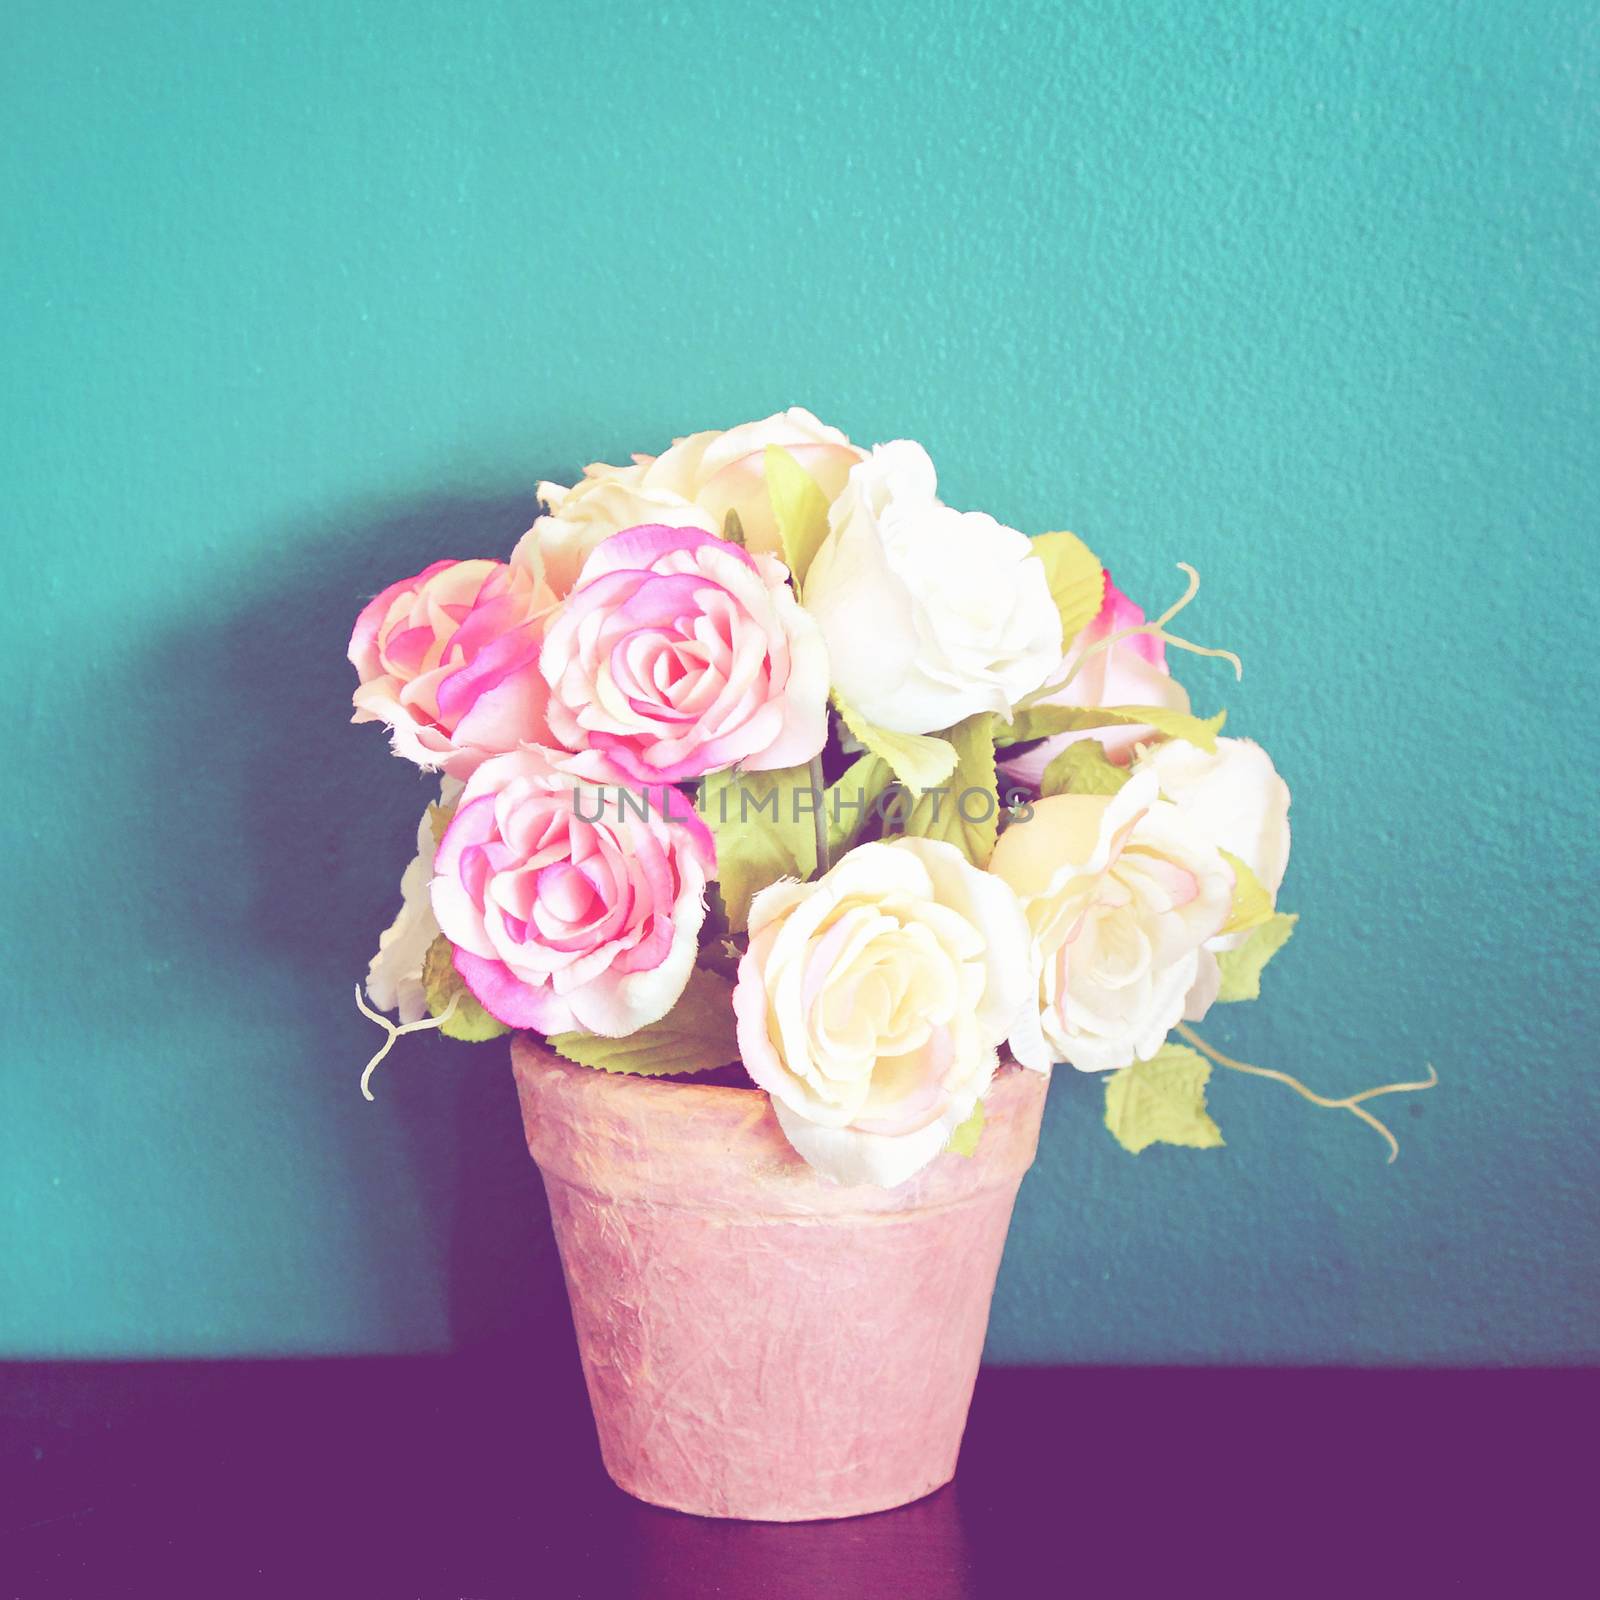 Rose in flowerpot for decoration with retro filter effect by nuchylee